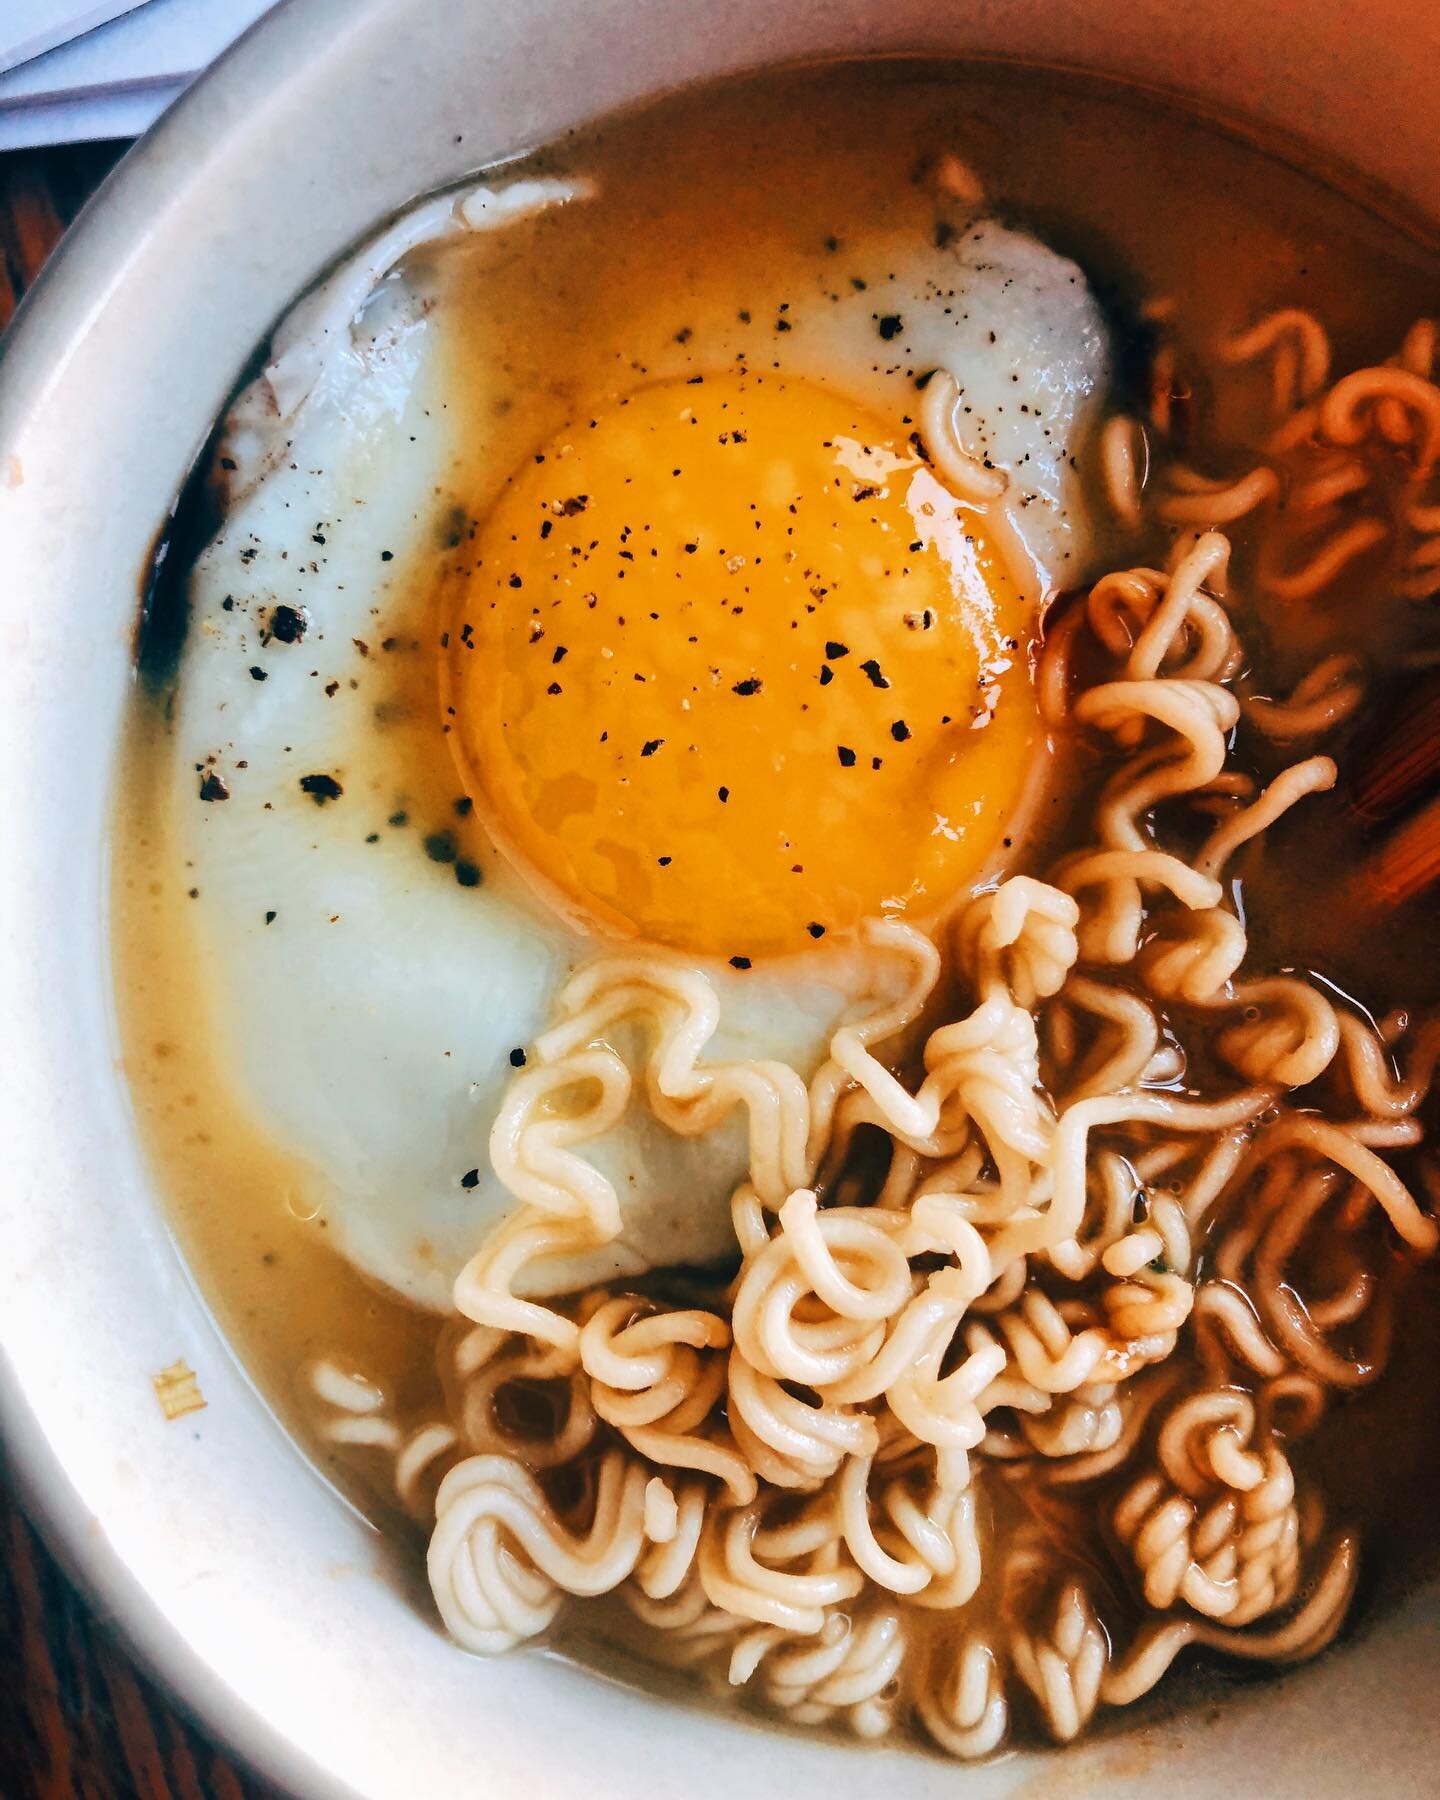 Ok I love instant ramen... ⁣
⁣
But I&rsquo;m all about upgrading instant ramen. ⁣⁣⁣Because it can be sooo much better.
⁣⁣⁣
I throw in all kinds of sauces and aromatics to enhance the already *perfect* meal that is The Instant Ramen packet. ⁣⁣⁣
⁣⁣⁣
My